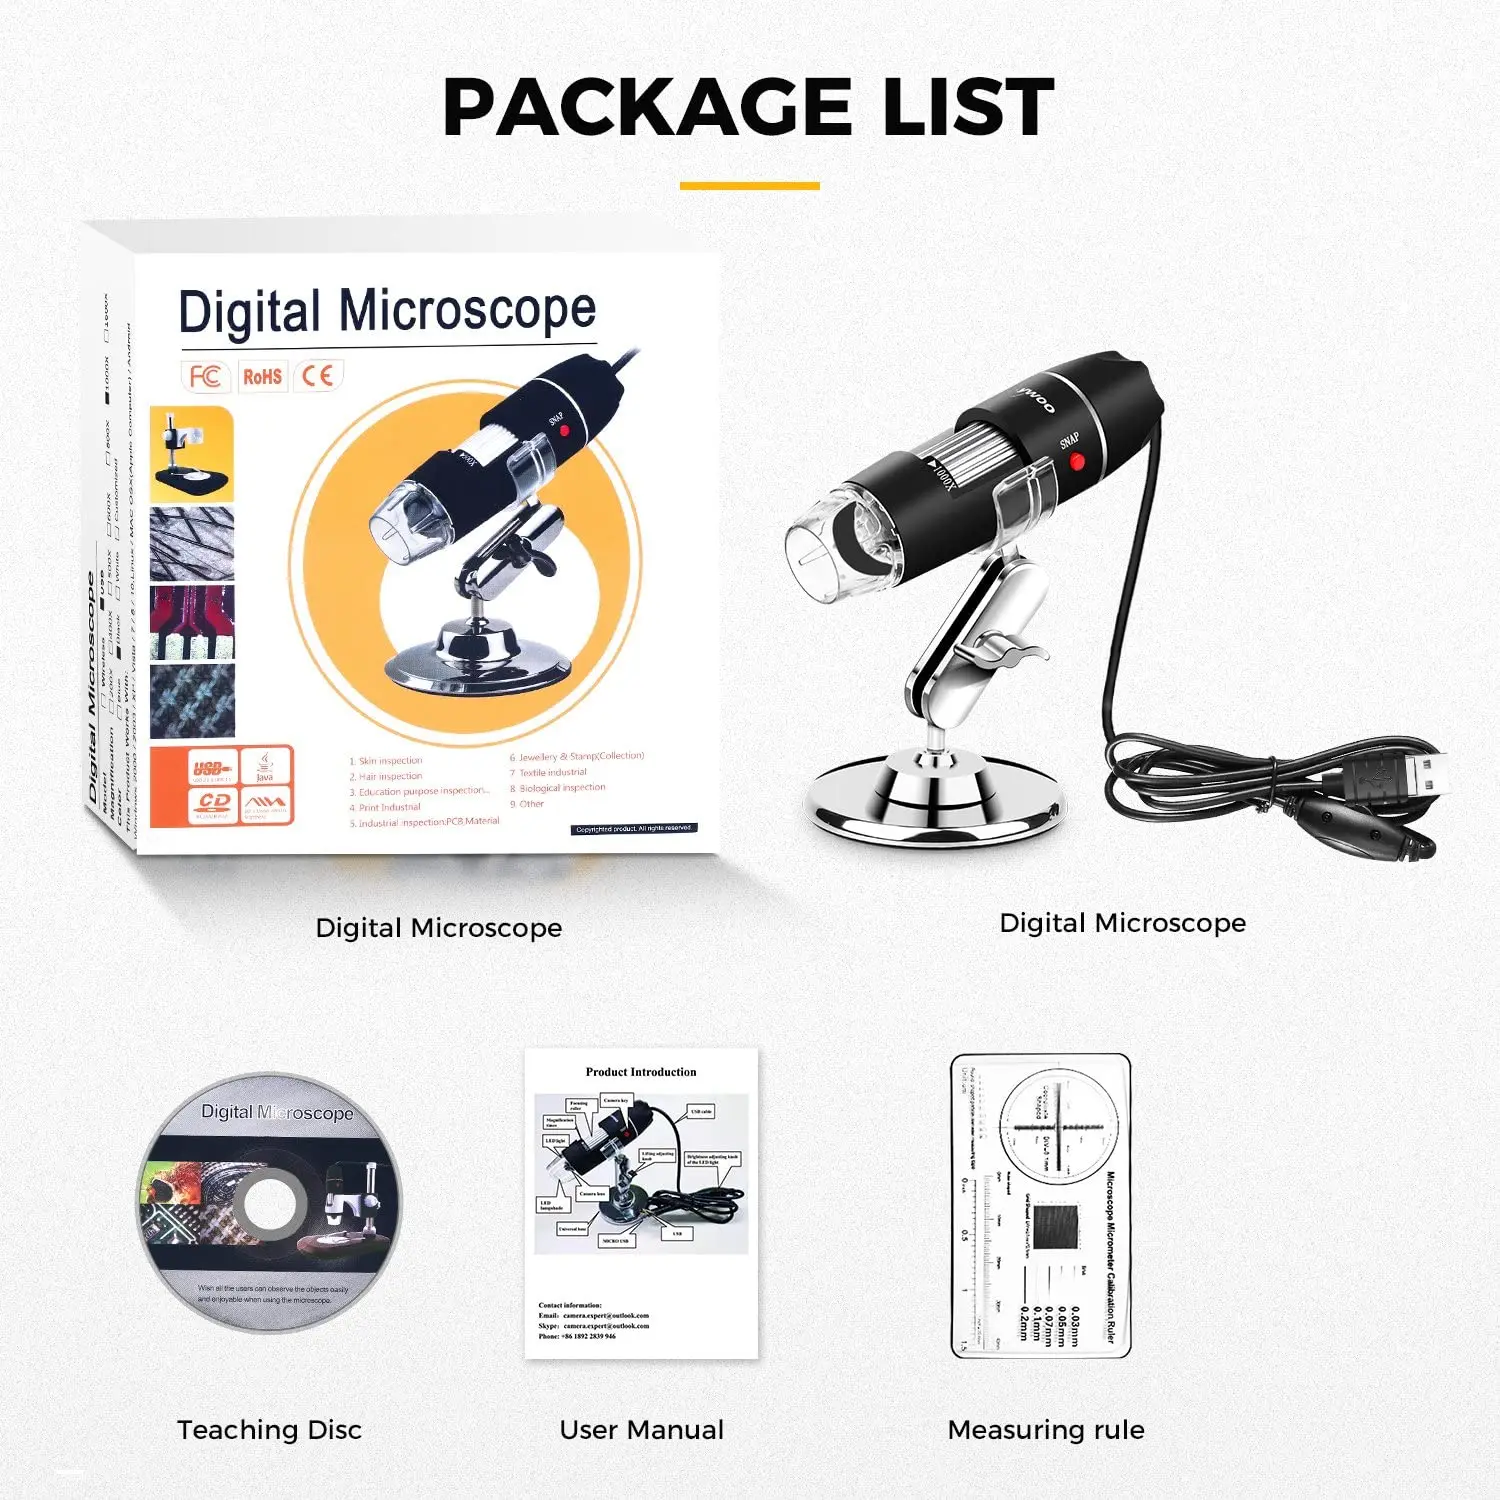 USB Microscope 8 LED USB 2.0 Digital Microscope Compatible with Mac Window 7 8 10 Android Linux by Sunnywoo Black 1 40 to 1000x Magnification Endoscope Mini Camera with OTG Adapter and Metal Stand 